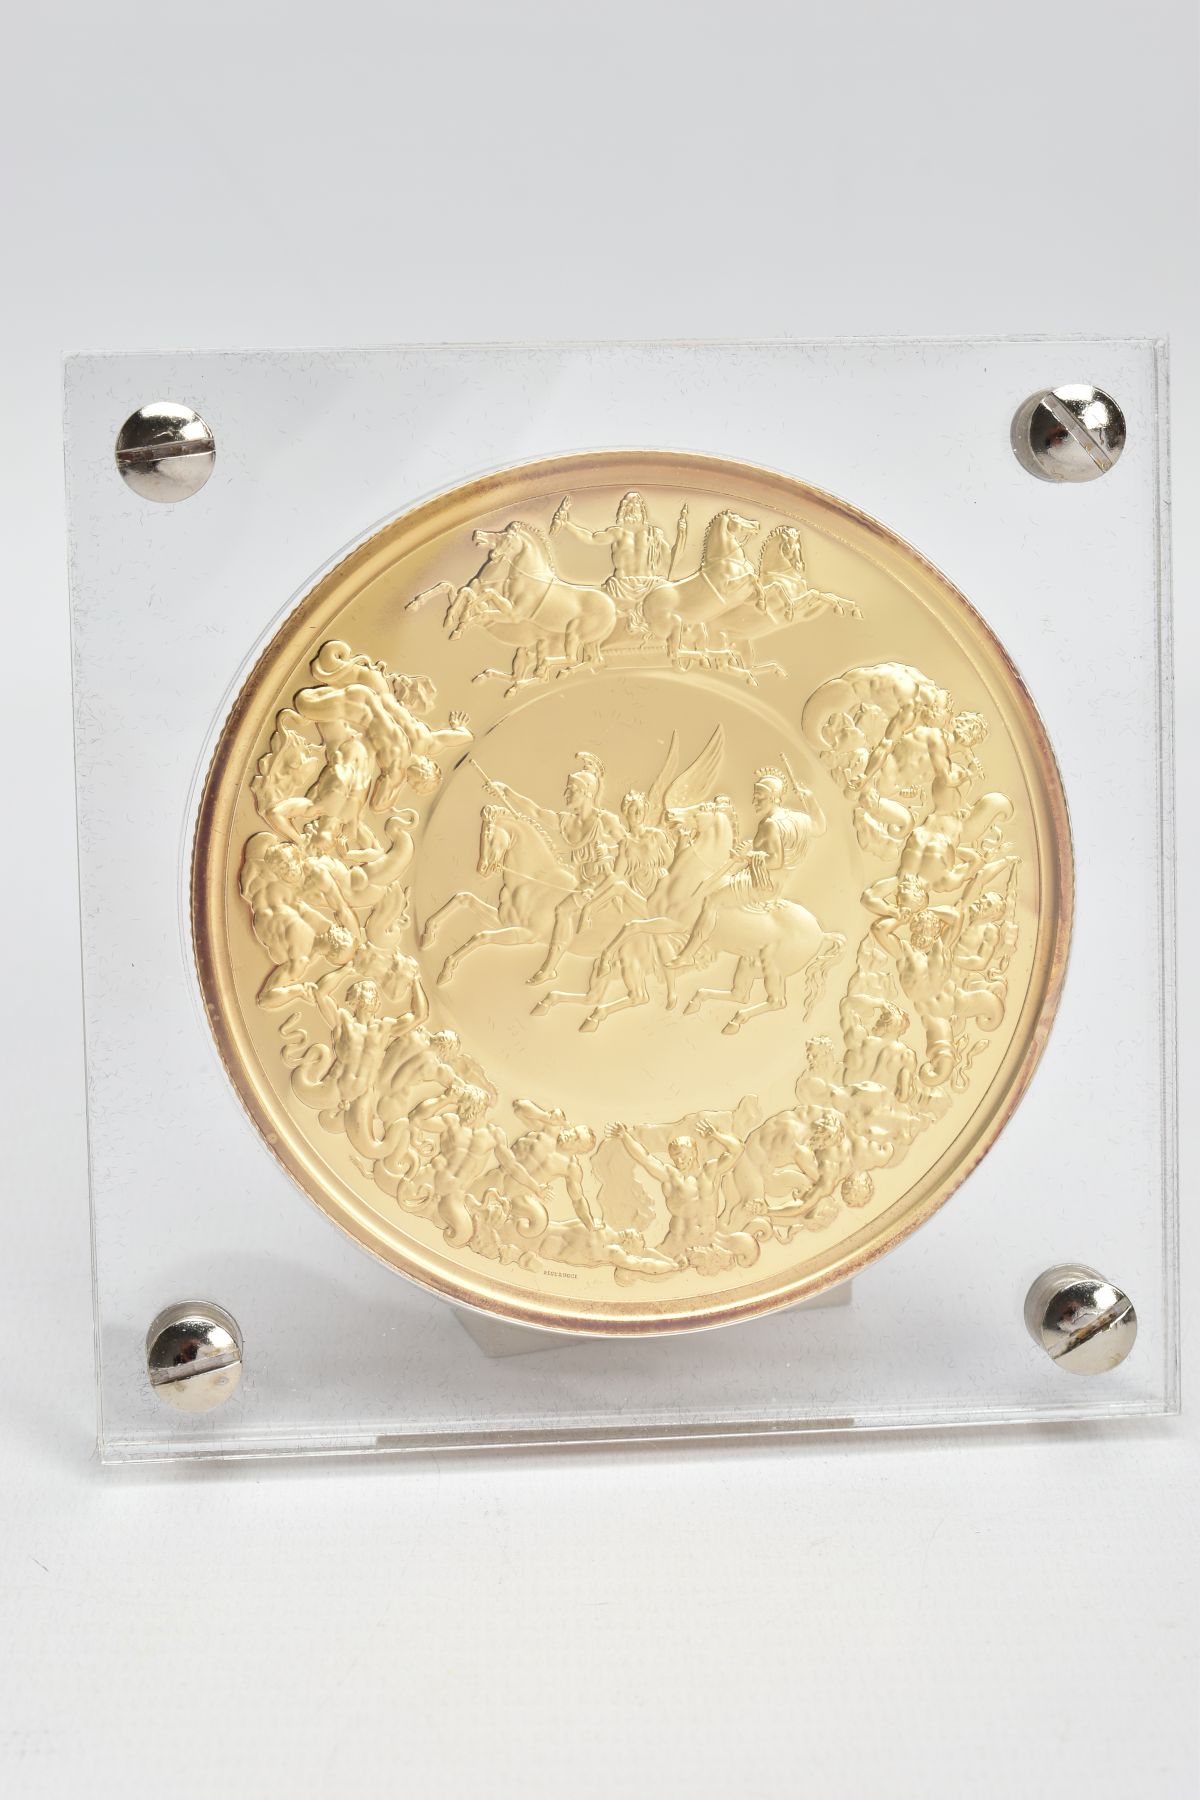 THE WATERLOO MEDAL, by Benedetto Pistrucci, a cased bronze layered in fine gold weighing a huge - Image 5 of 5